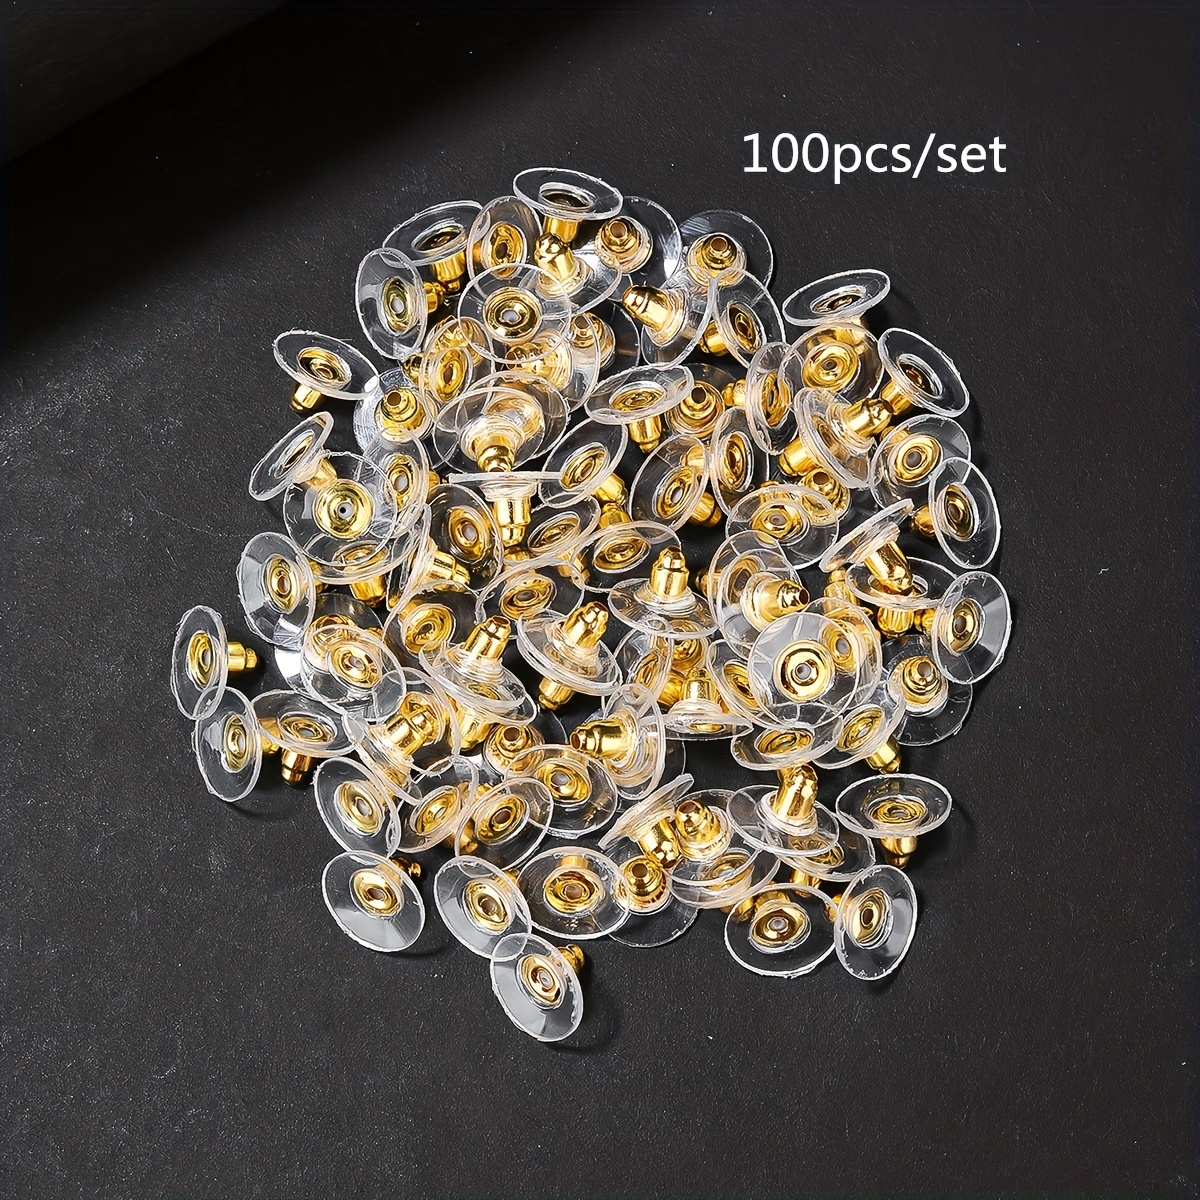 100/500pcs Silicone Rubber Earring Back Stoppers For Stud Earrings Ear  Stopper Diy Jewelry Making Earring Findings Accessories A